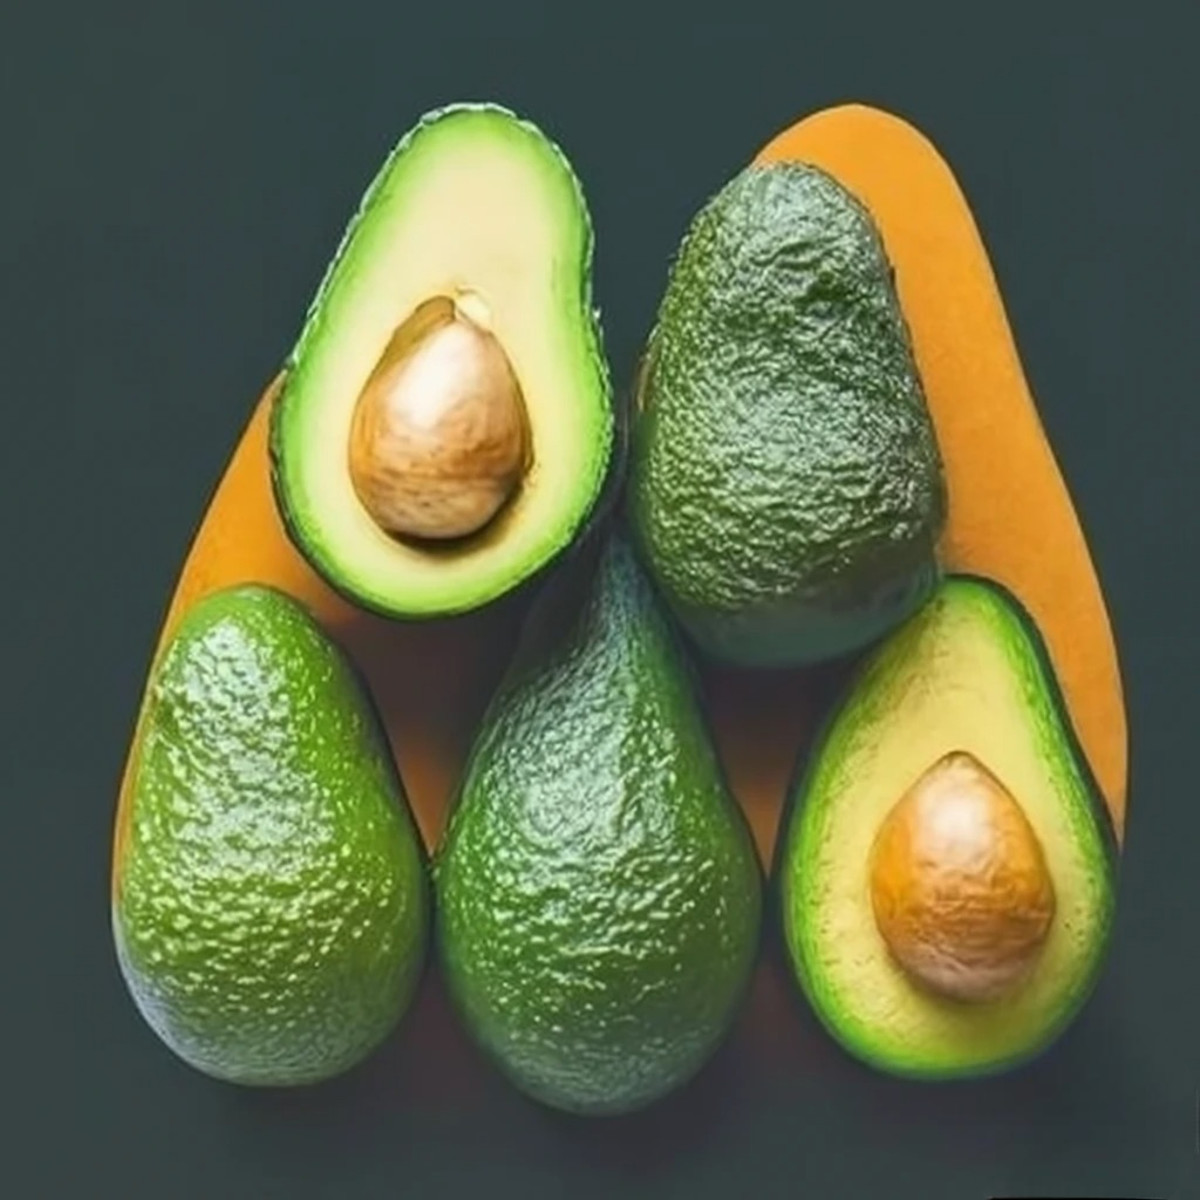 Is The Avocado Seed Safe to Eat? Its Uses in Medicine, Beauty, Art & More